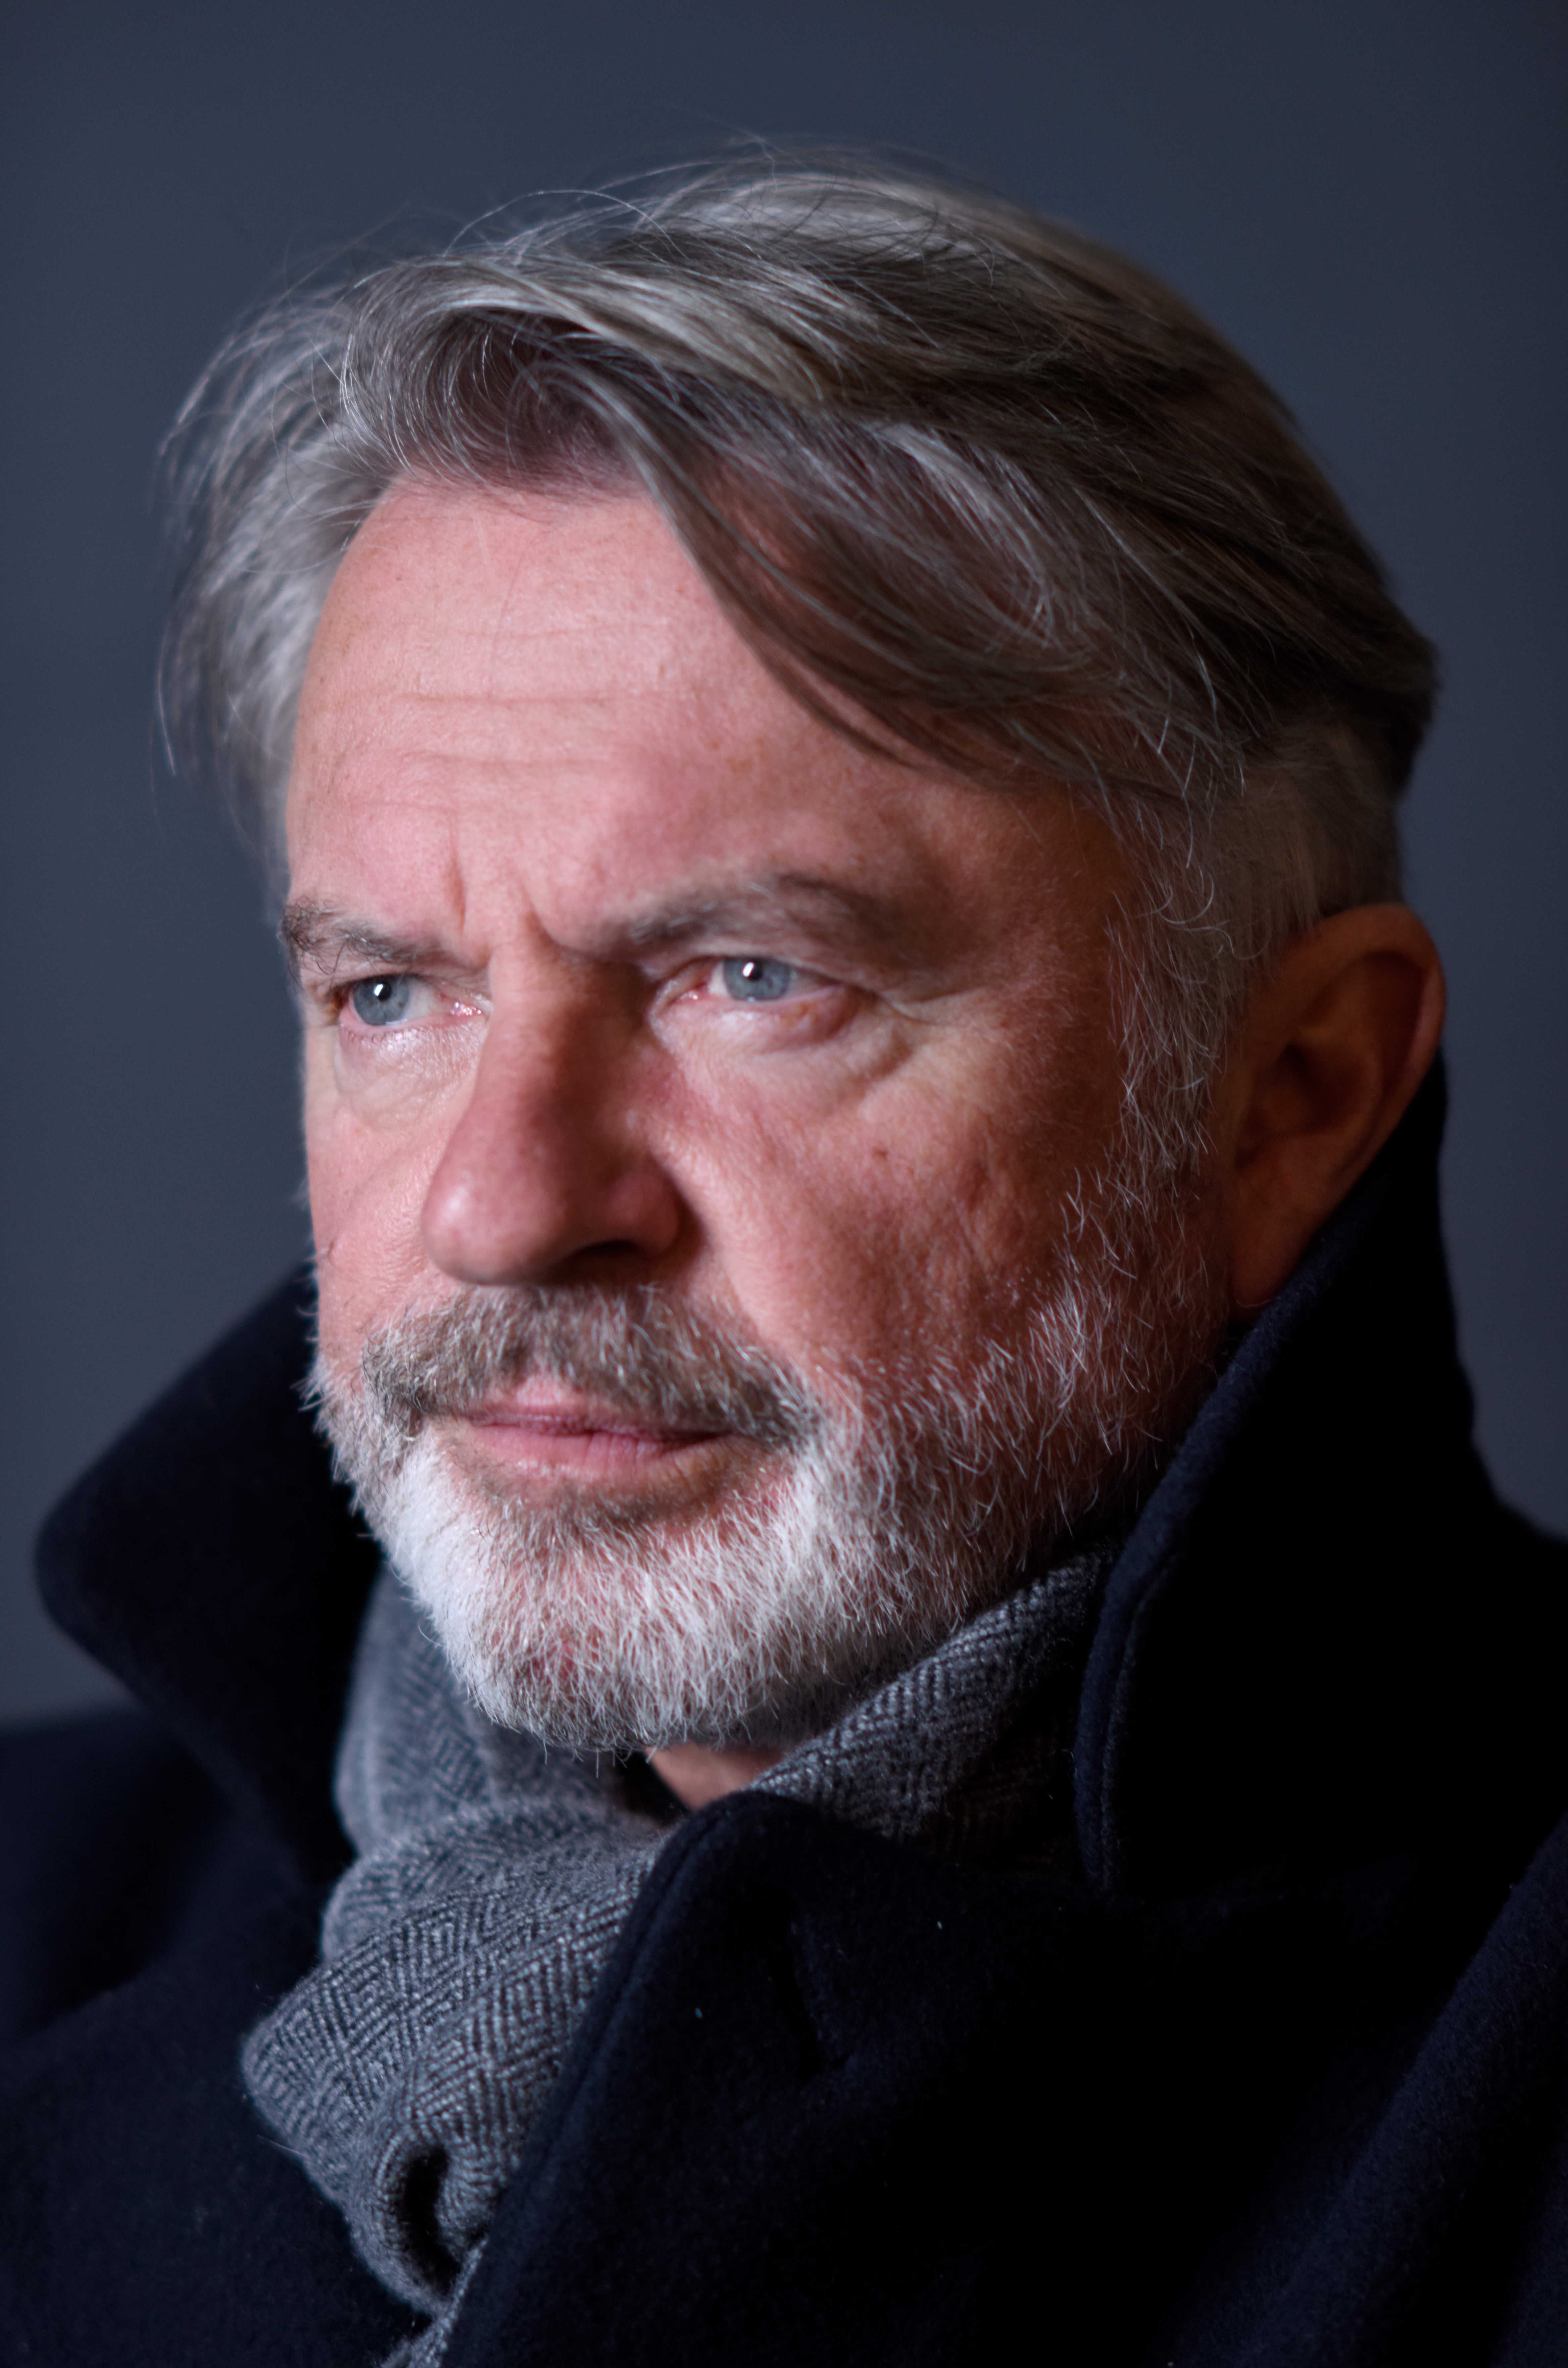 Sam Neill poses for a portrait during the WireImage Portrait Studio at Village at The Lift on January 22, 2016 in Park City, Utah. | Source: Getty Images